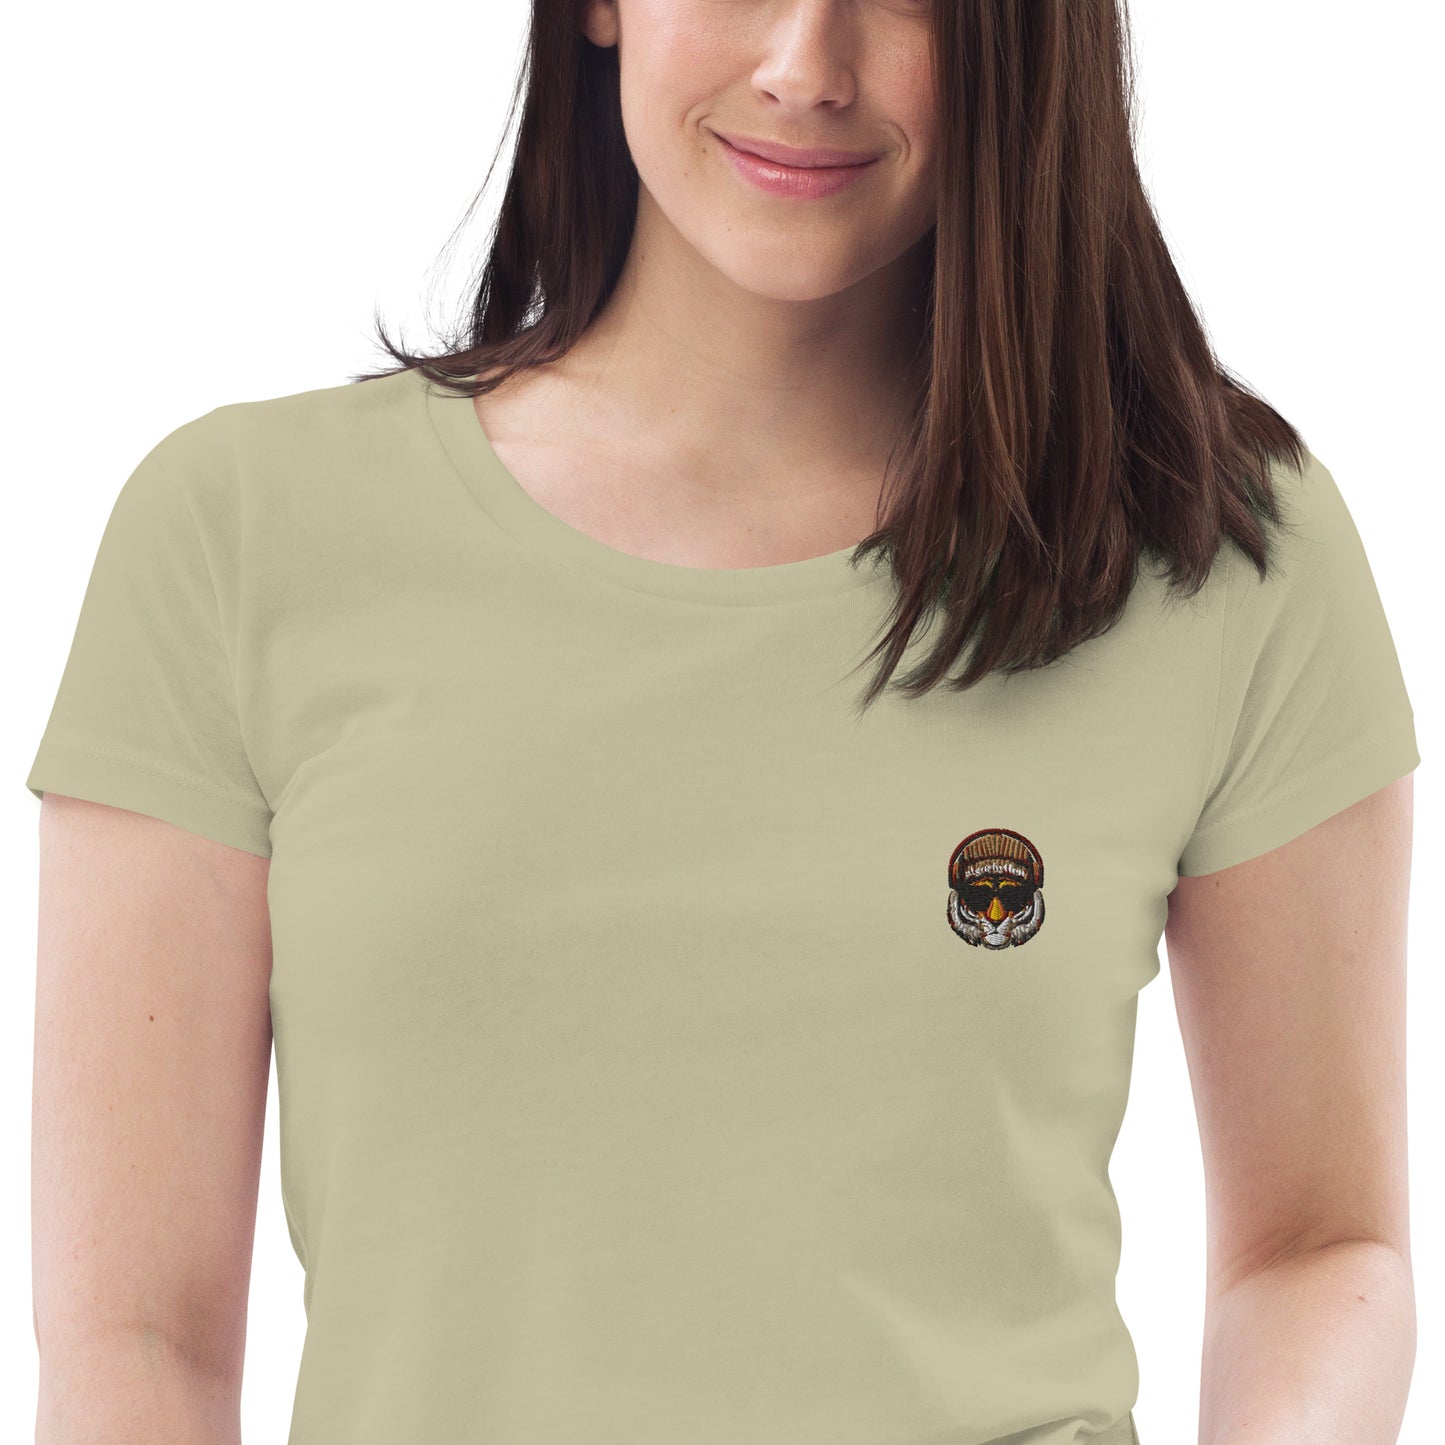 Algorhythm: Women's A.G.R. fitted eco tee